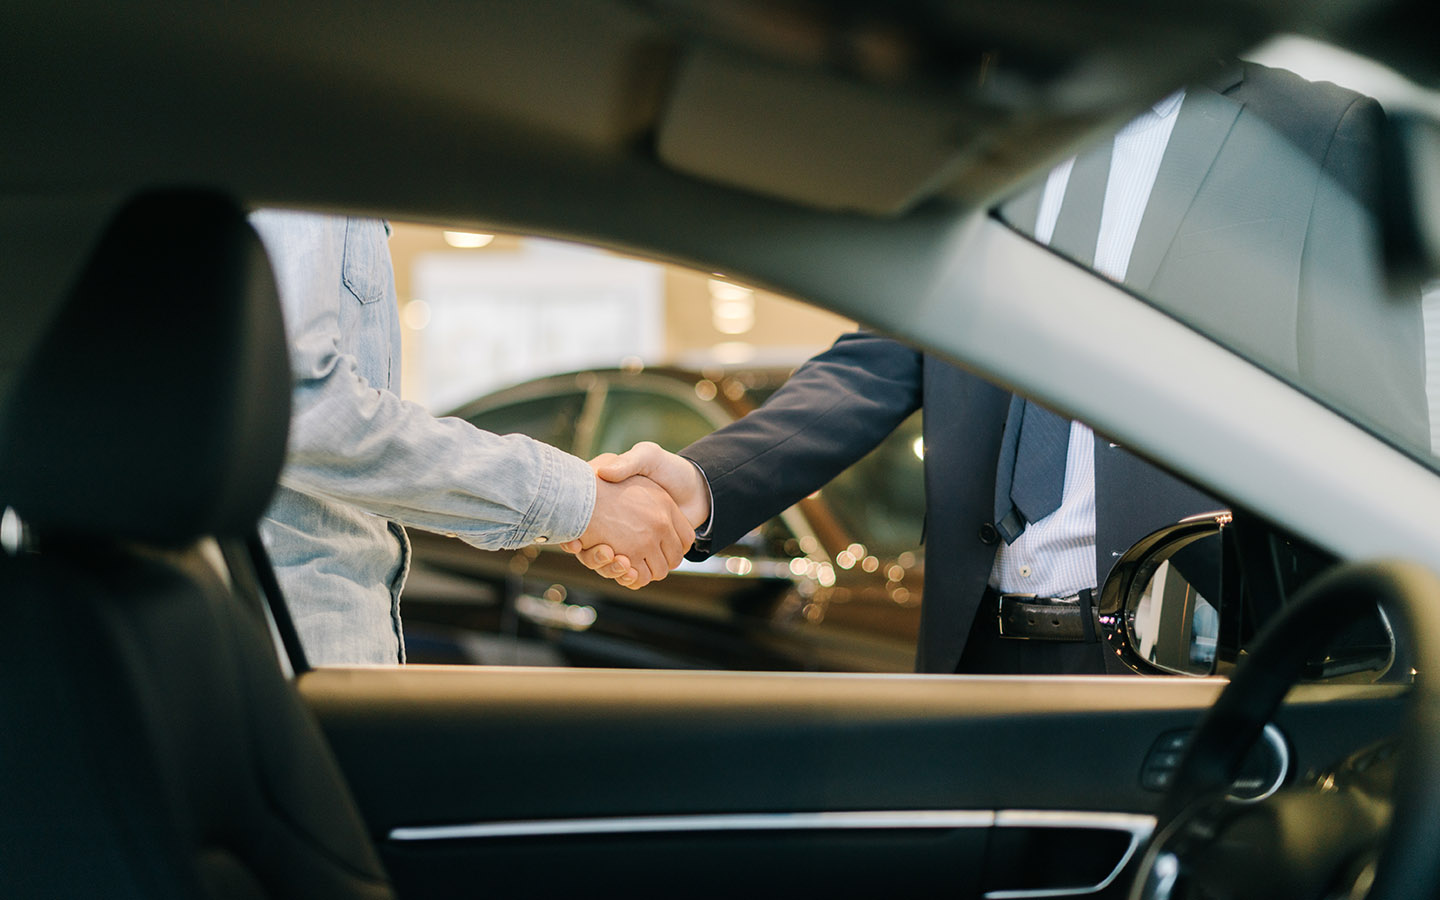 follow the top car advertisement tips to pace up the selling process